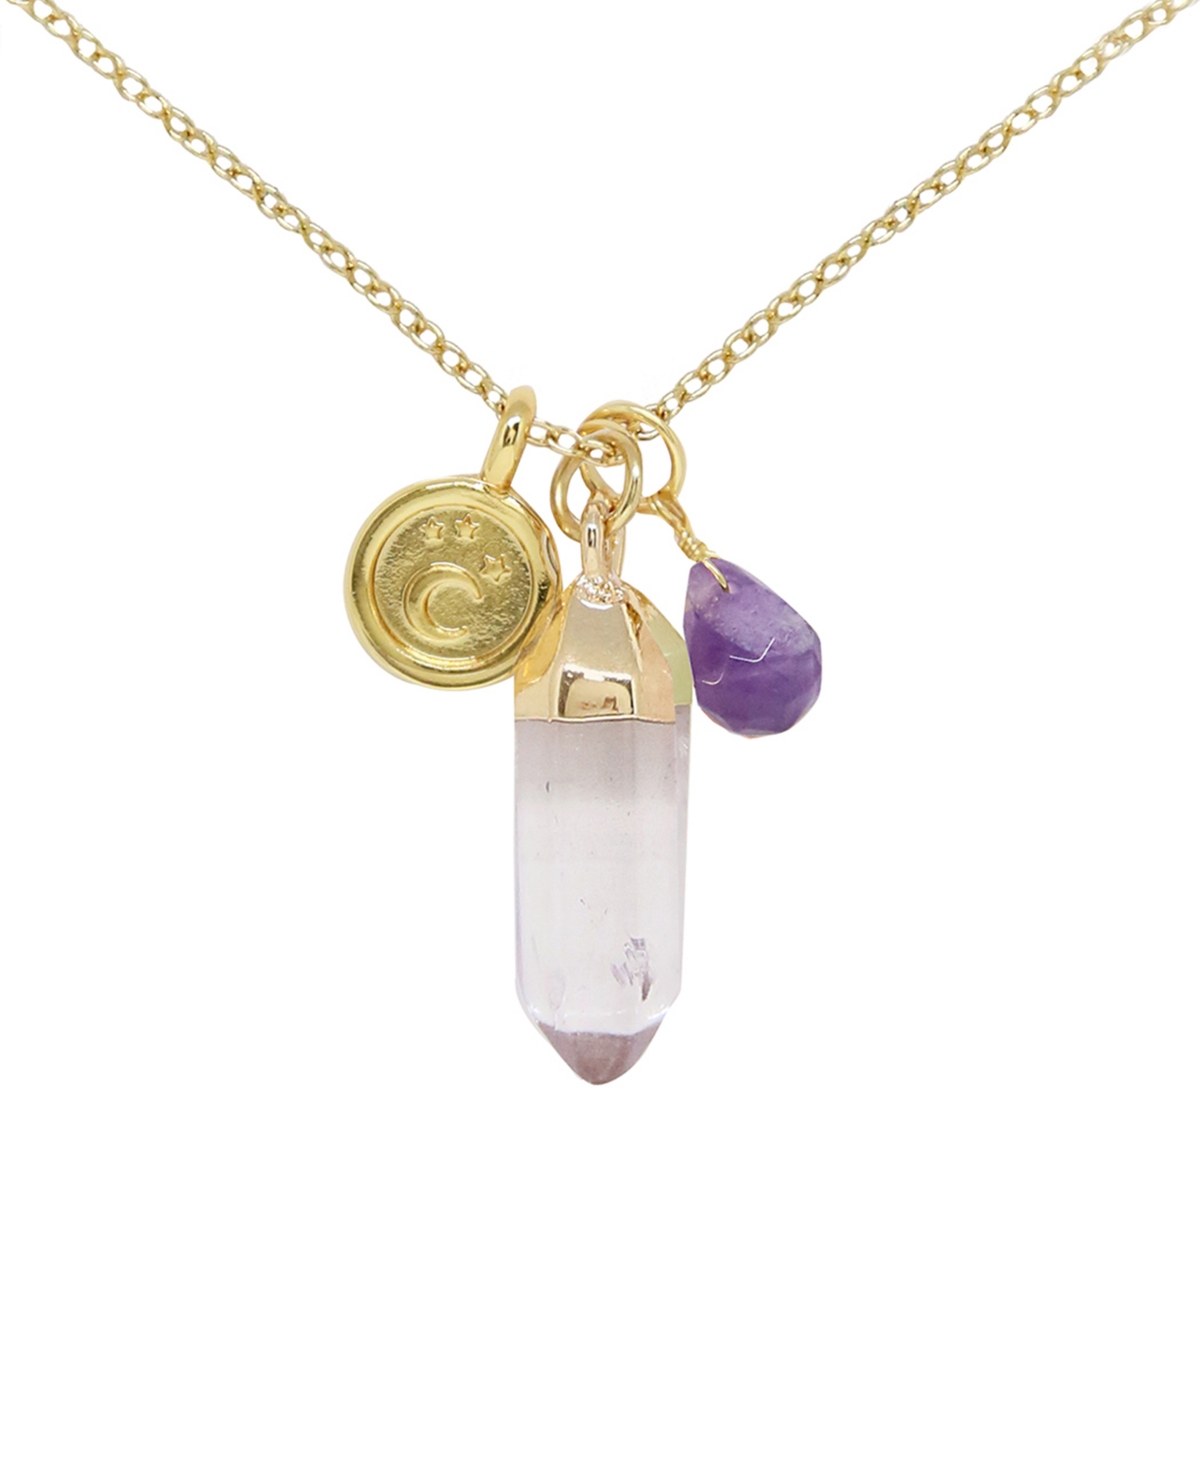 Charged Crystal Quartz Charm Necklace With Amethyst